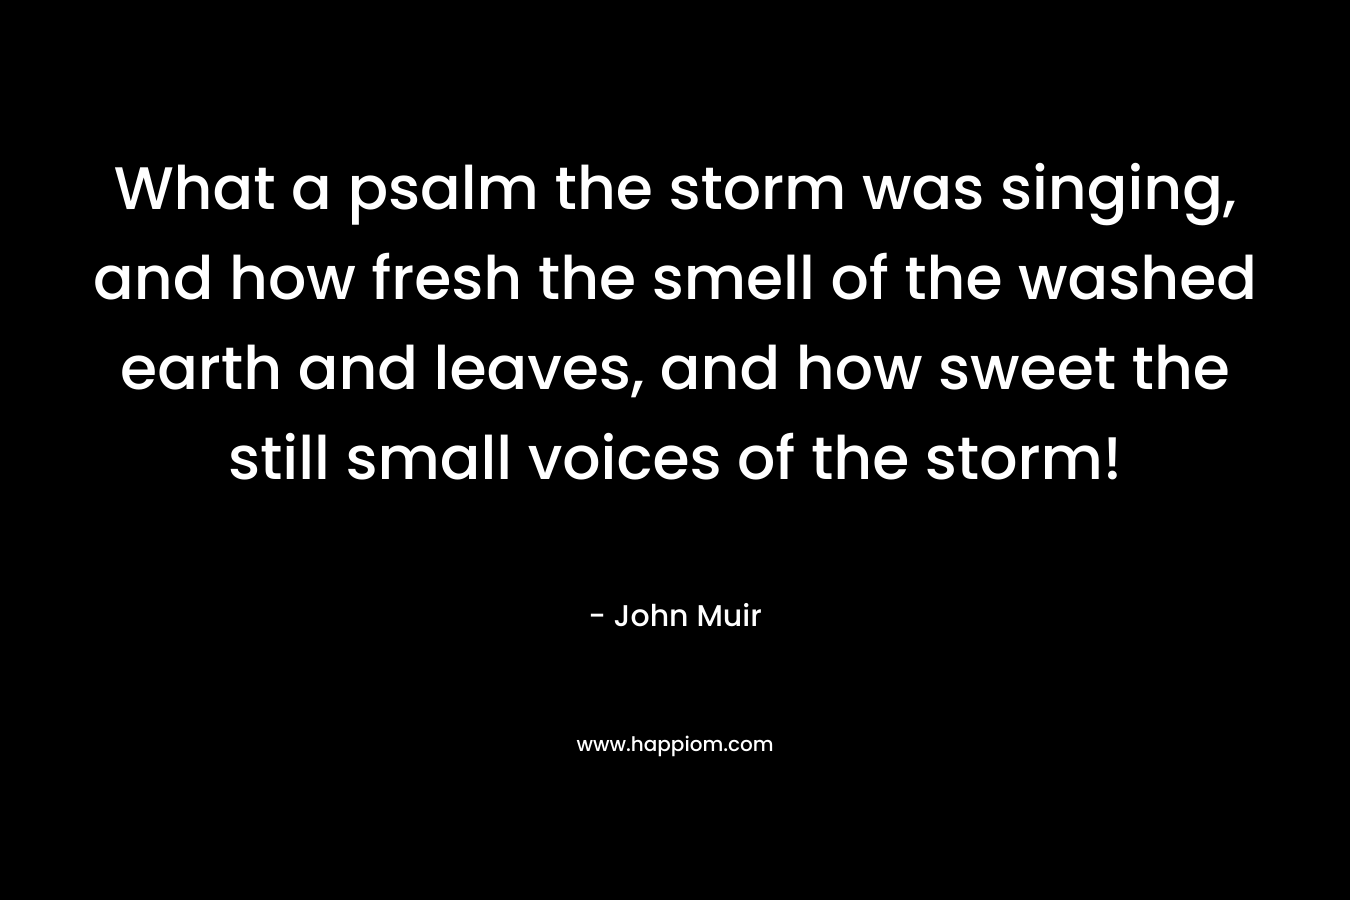 What a psalm the storm was singing, and how fresh the smell of the washed earth and leaves, and how sweet the still small voices of the storm!